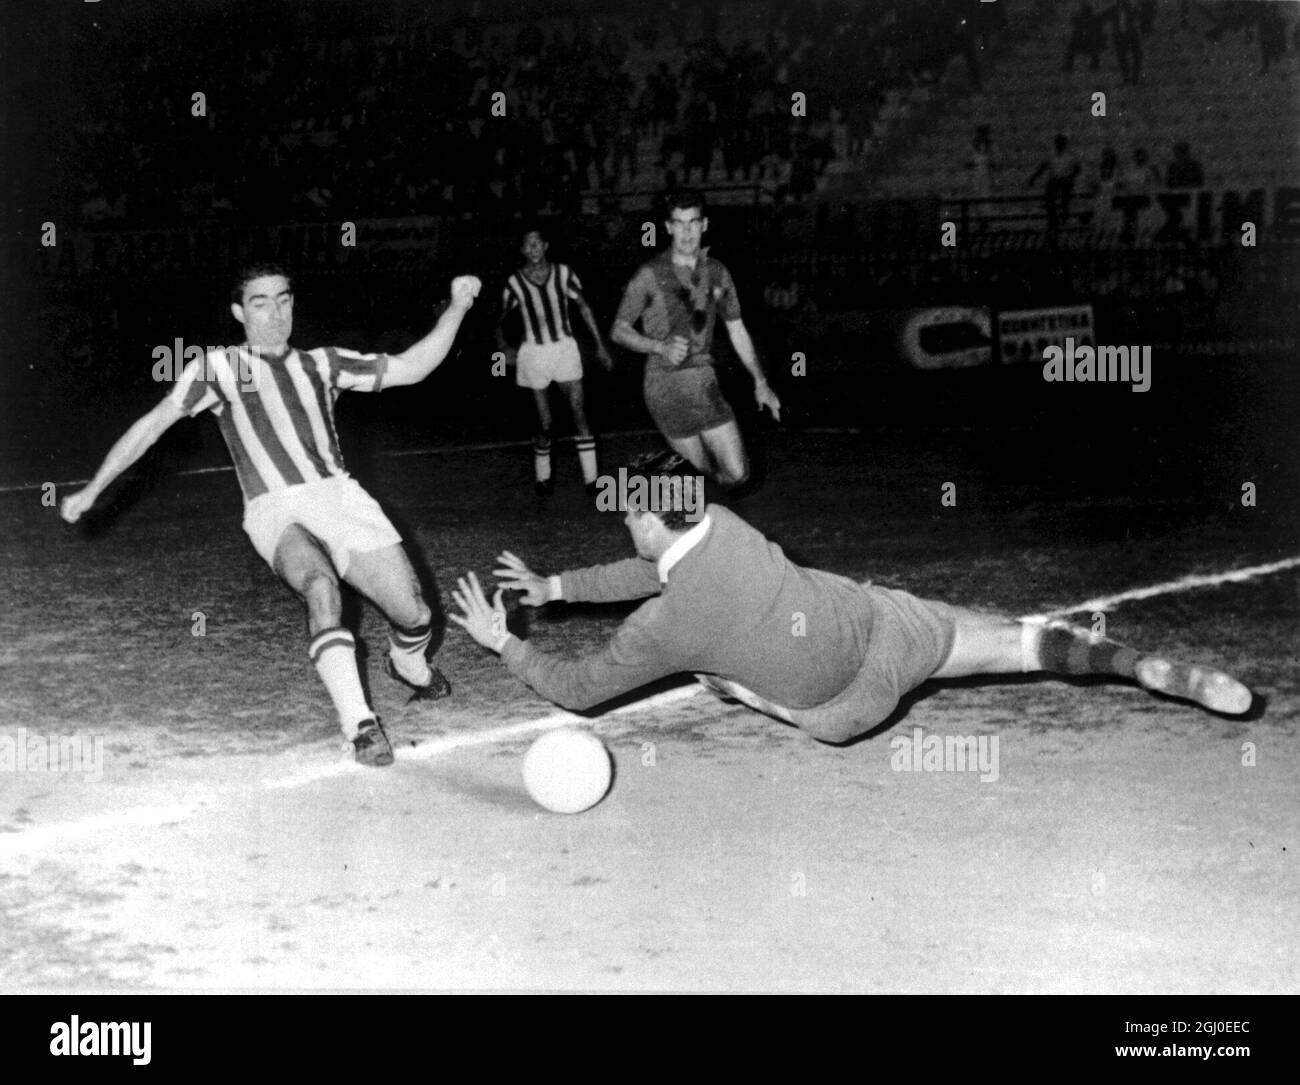 Sideris of Olympiacos (Athens) is pictured materializing the first and unique Greek goal in the eighty-second minute of the second half during the Olympiacos versus Barcelona. Pesudo, the Spanish goal-keeper's interference did not save the situation. The game was played in conjuction with the Grecian-Spanish festivities on the occasion of the Royal wedding which linked the two countries. The result : Olympicaos 1 Barcelona 0 May 22nd 1962 Stock Photo